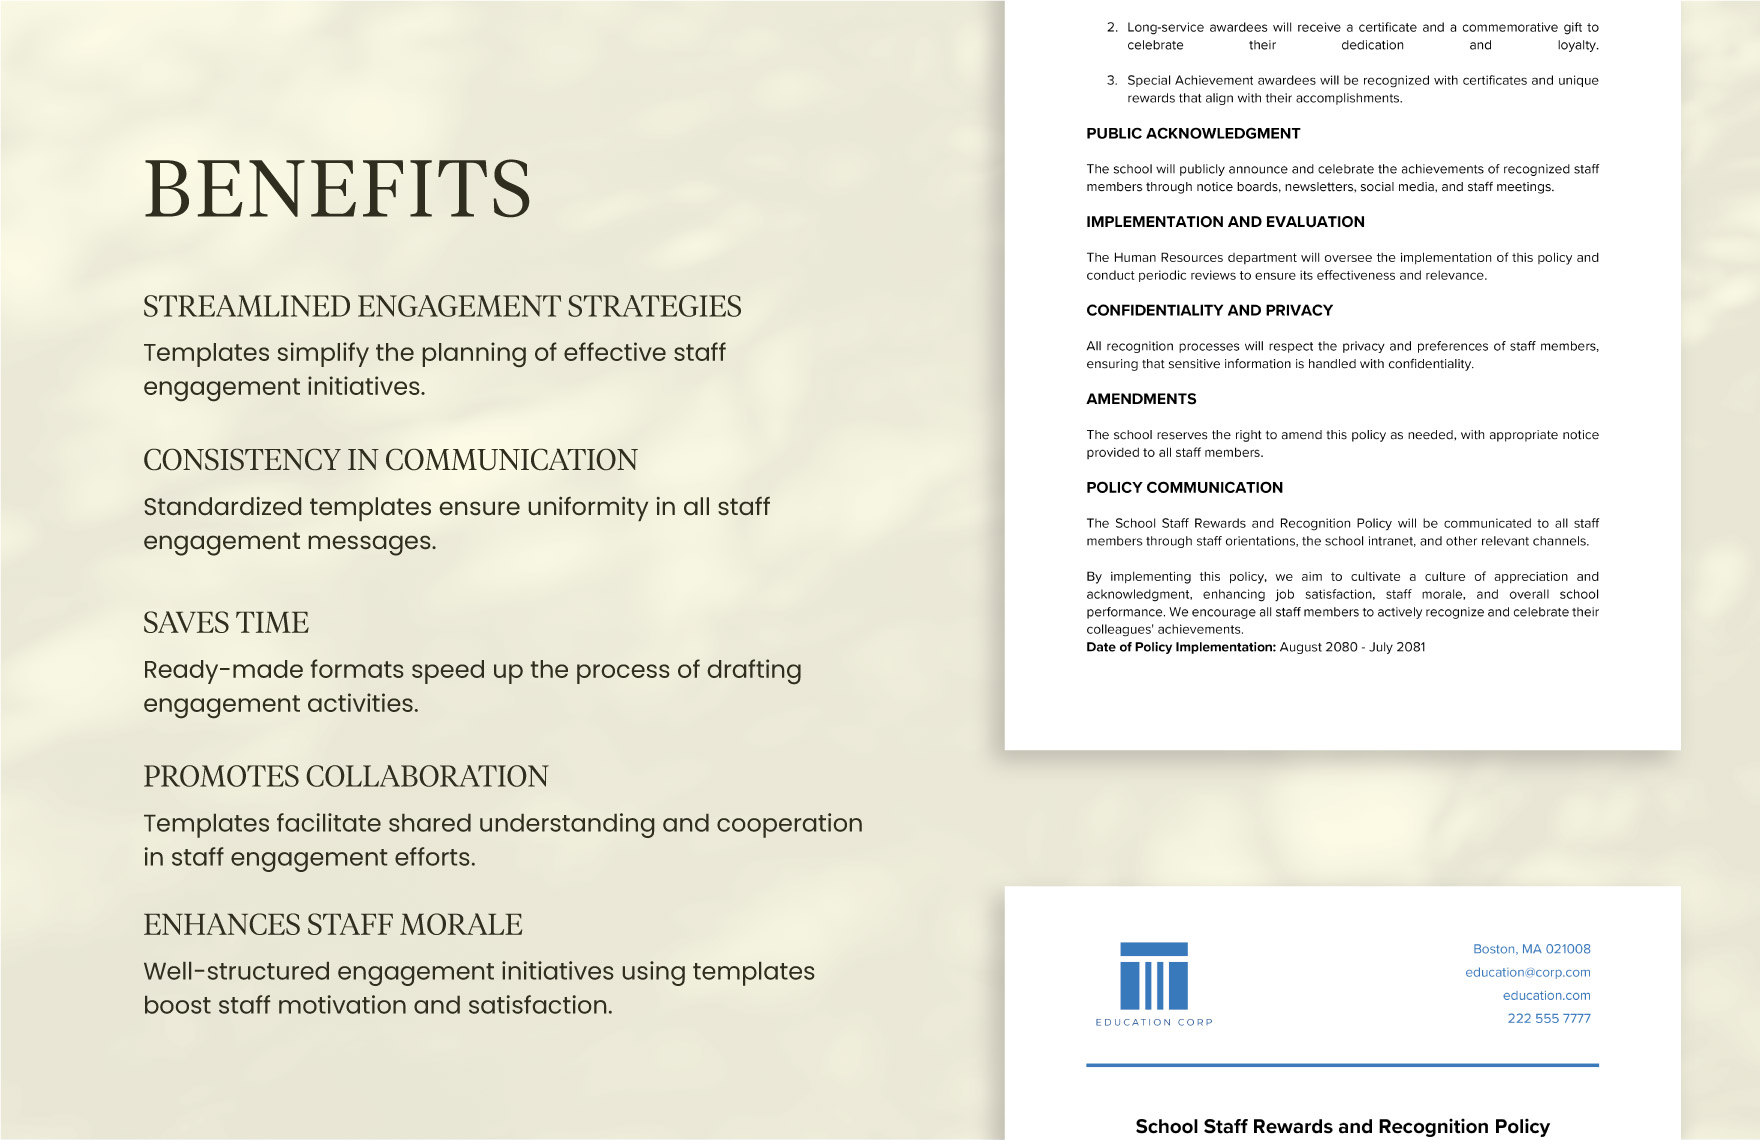 School Staff Rewards and Recognition Policy Template